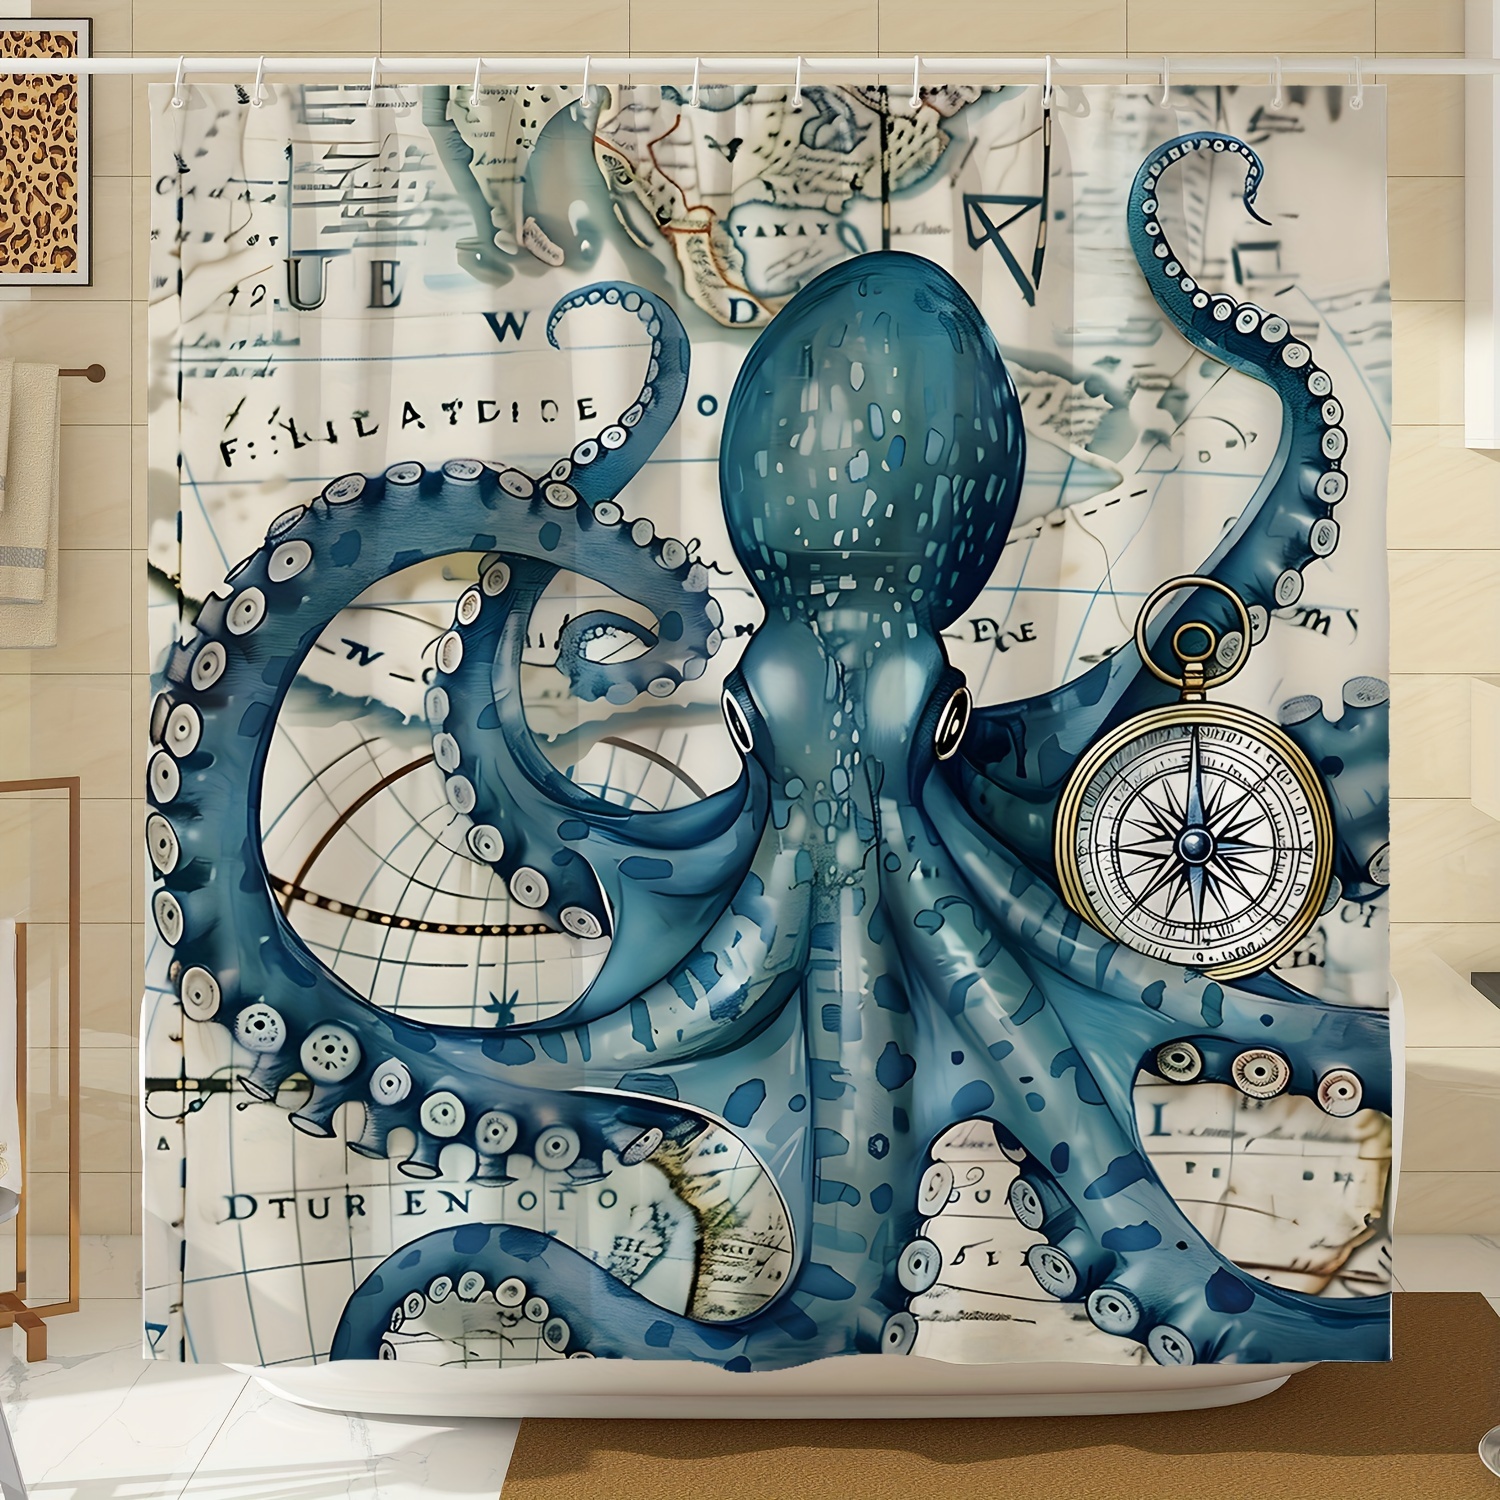 

Octopus Nautical Shower Curtain With Compass Design - Polyester, Water-resistant, Machine Washable, Includes 12 Hooks, Animal Print, Unlined, Woven Weave, Ocean Themed Bathroom Decor - 71x71 Inches